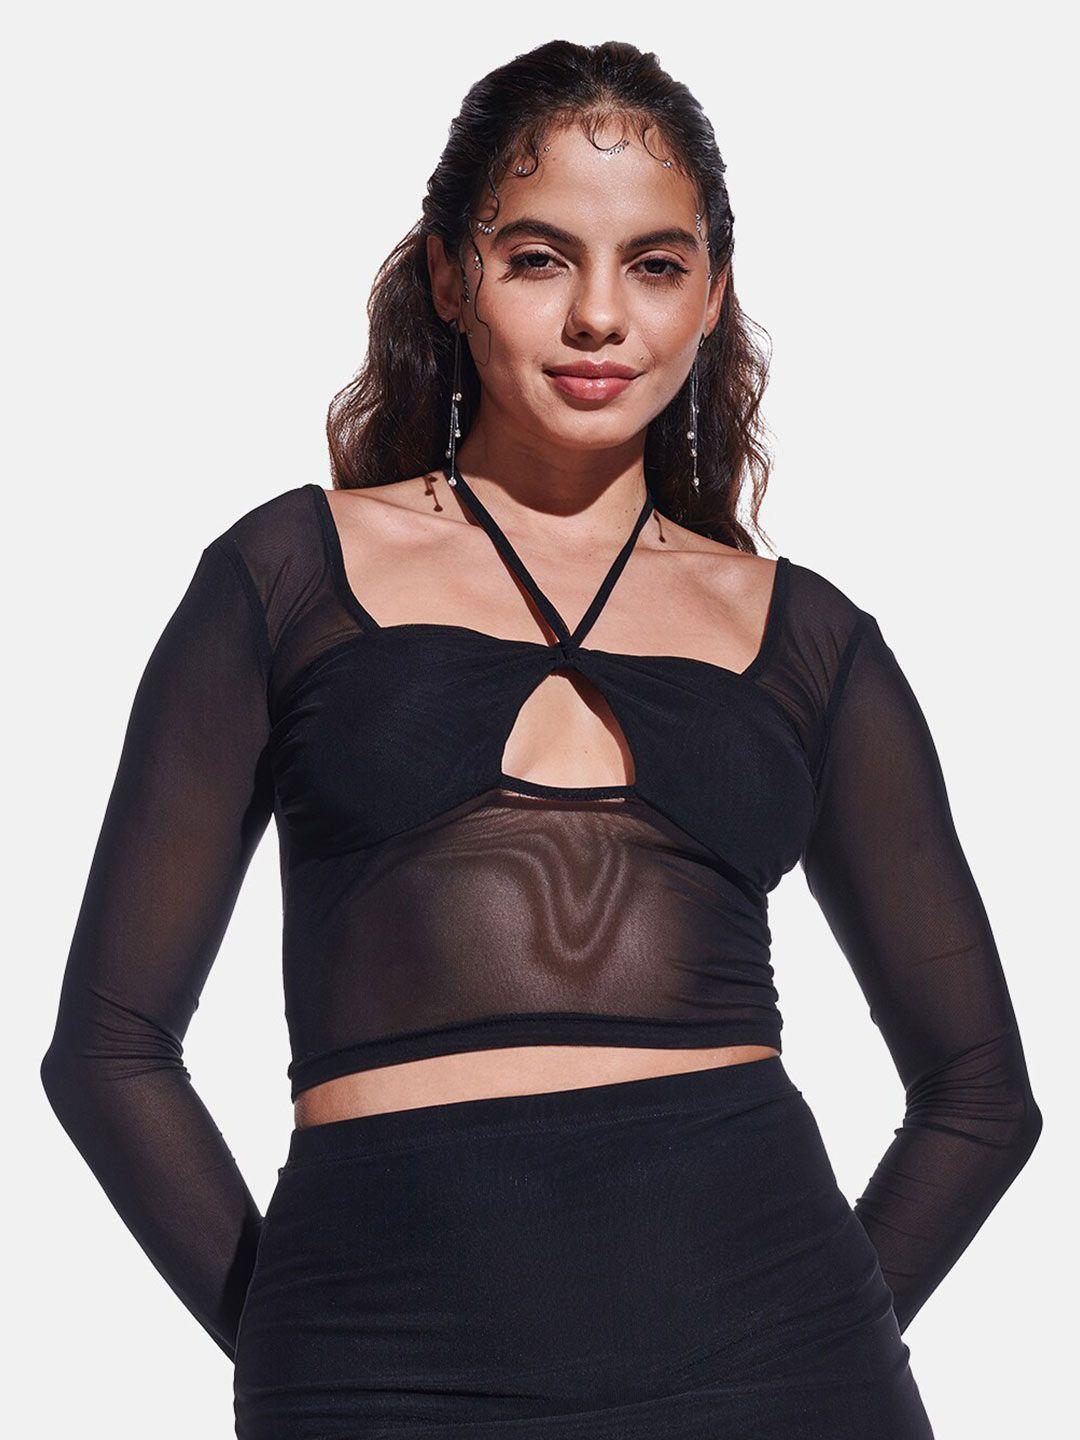 IZF Cross-Over Long Sleeved Mesh Styled Back Crop Top